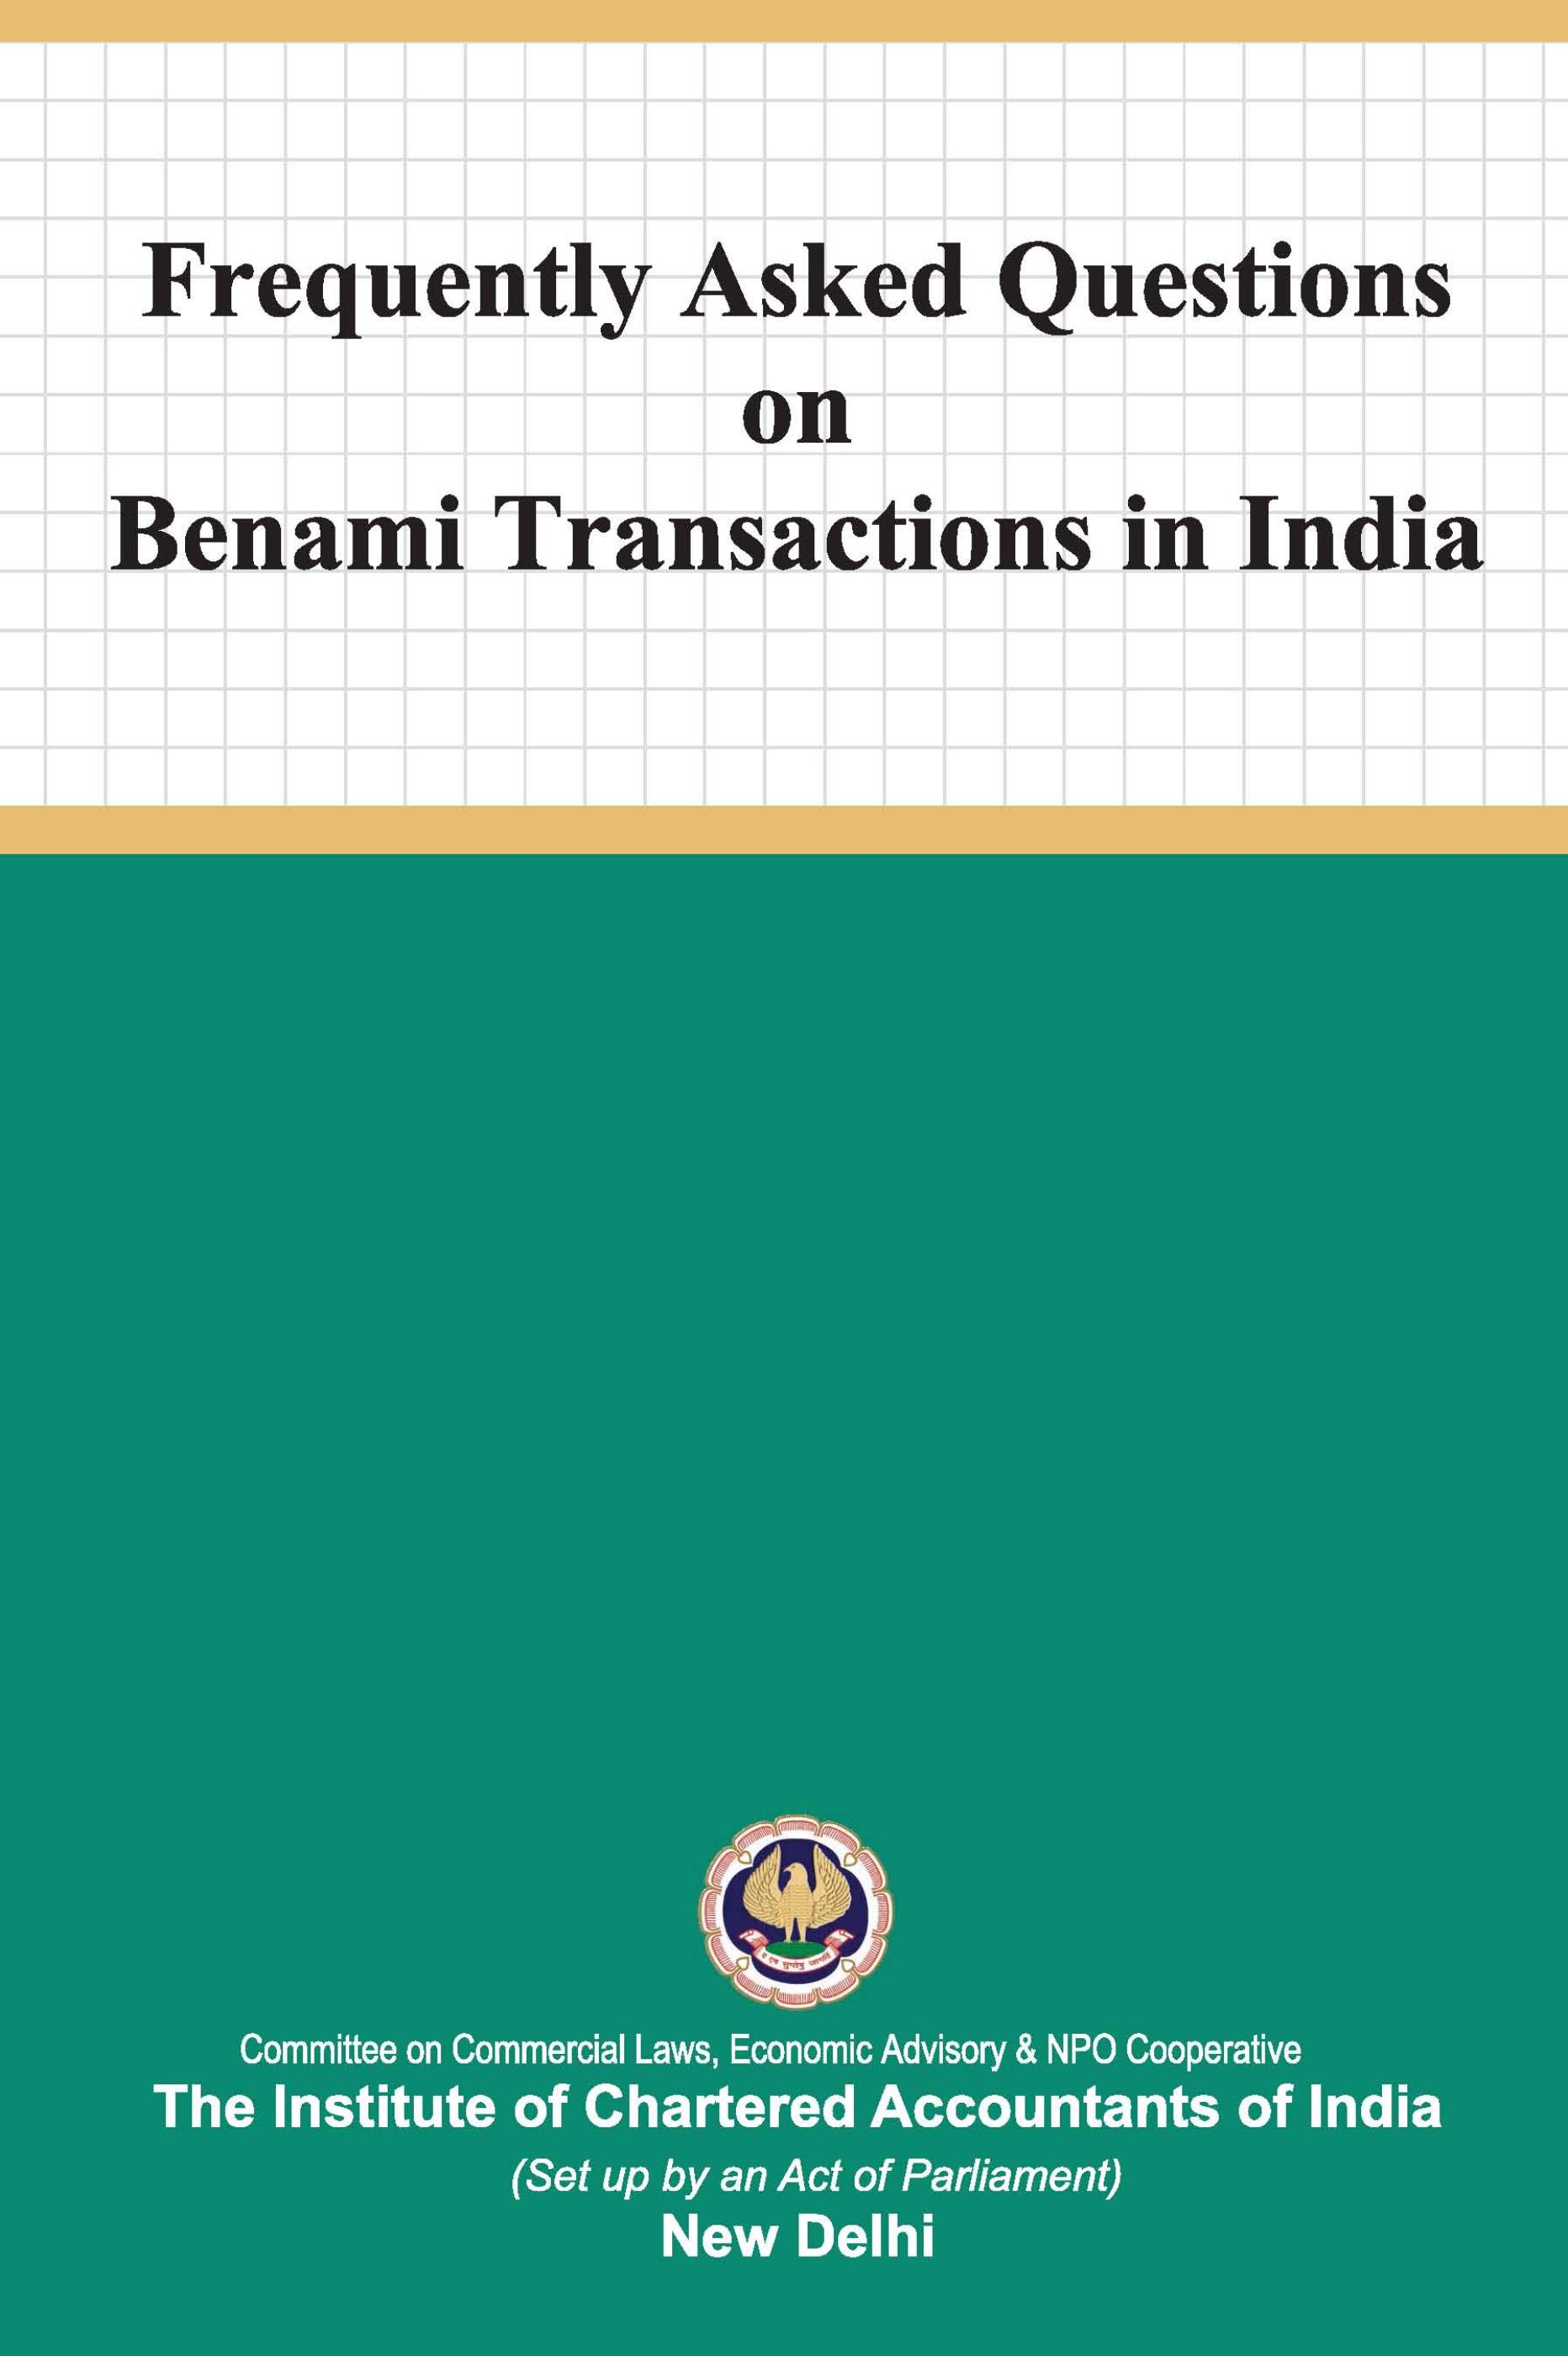 Frequently Asked Questions on Benami Transactions in India (July 2023)